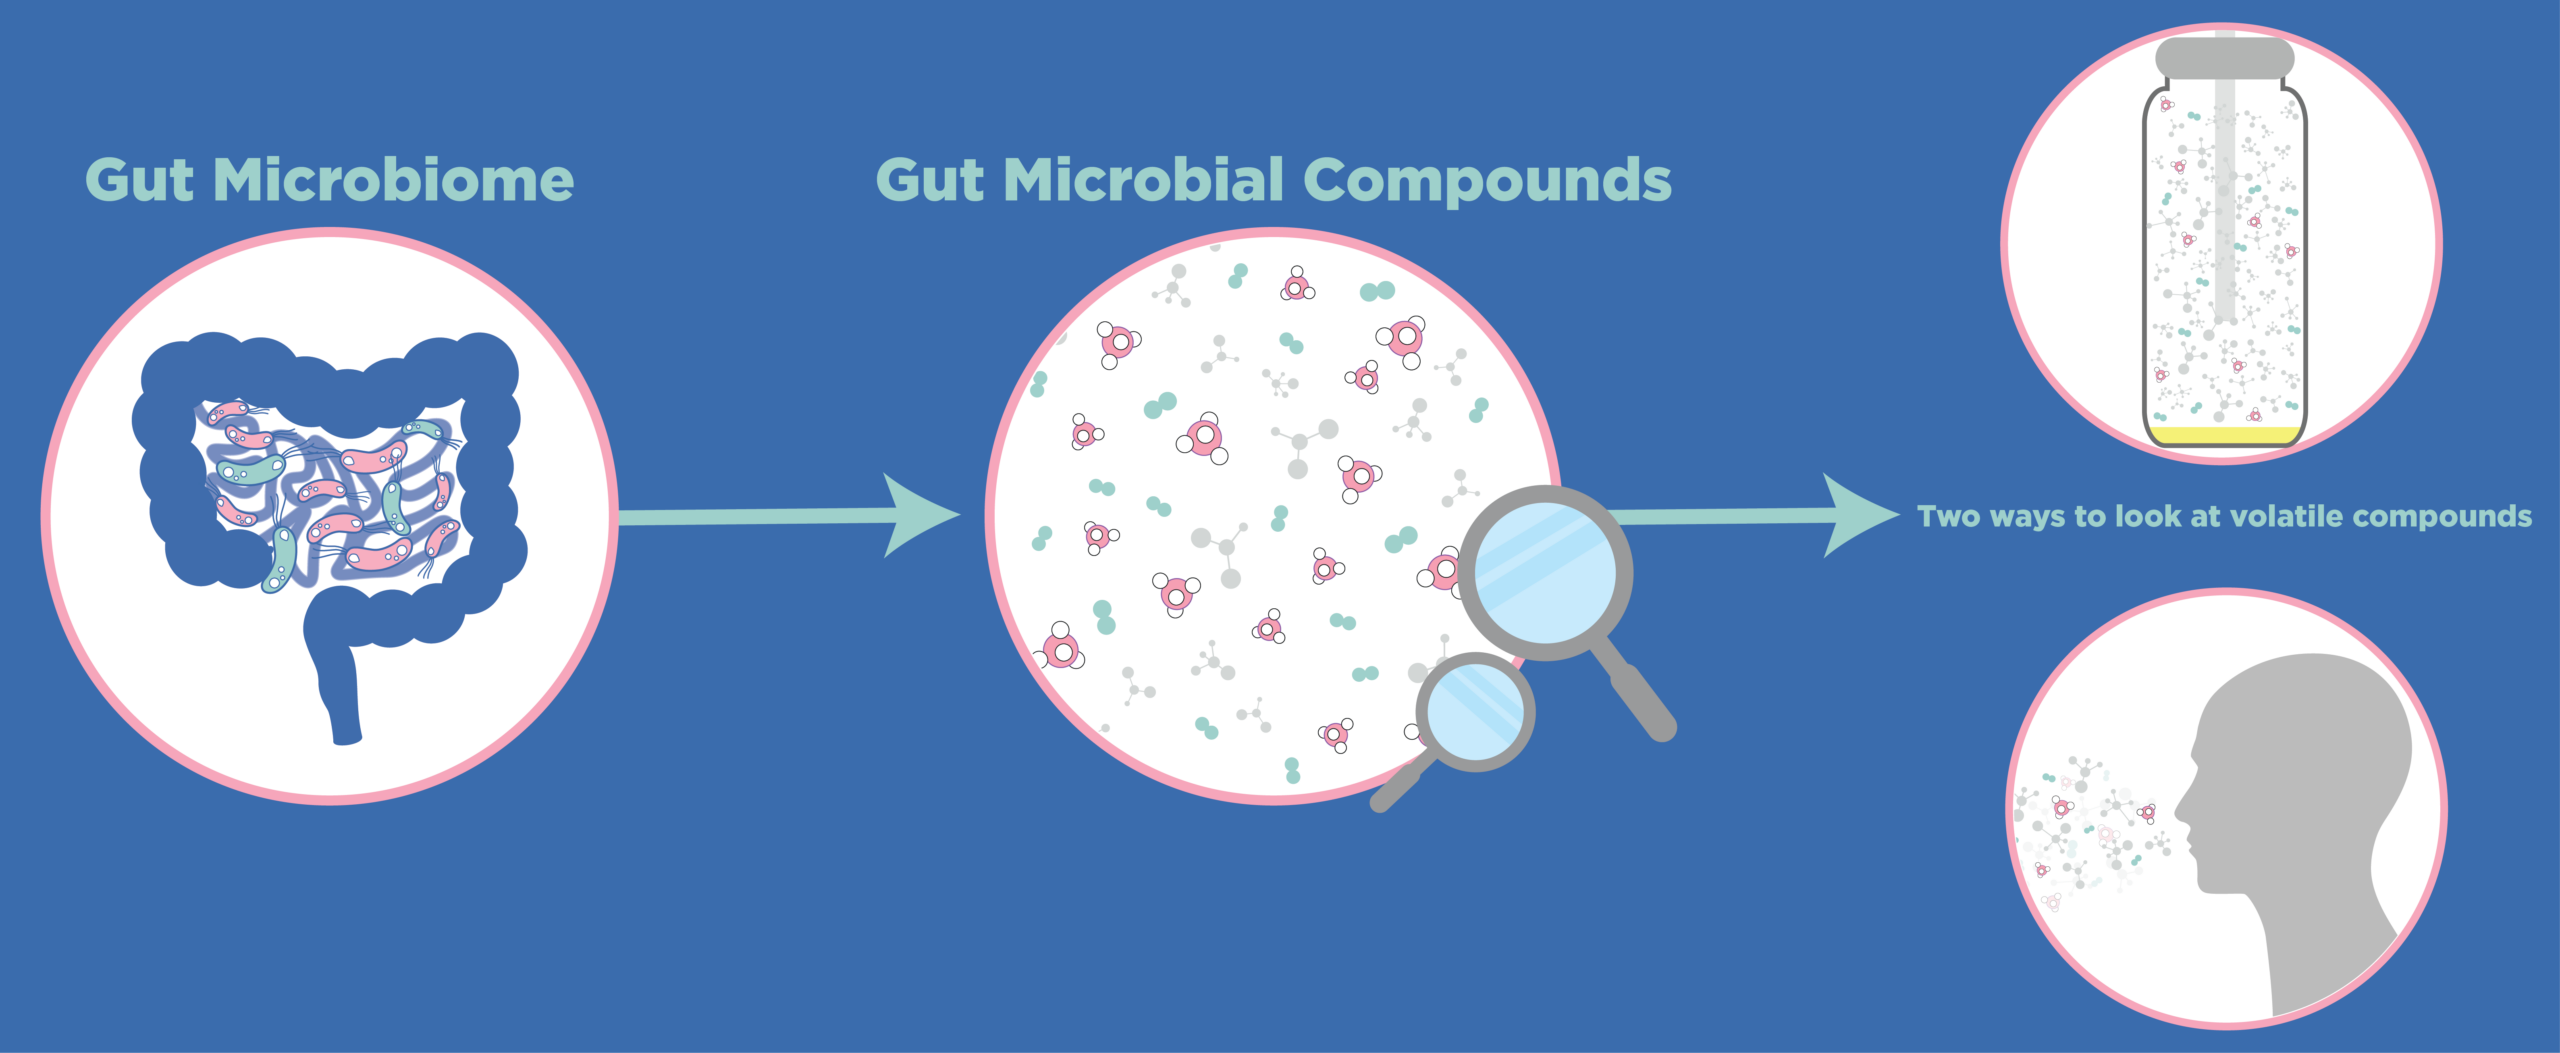 Two ways to analyse the gut microbiome - headspace analysis of biological samples and breath